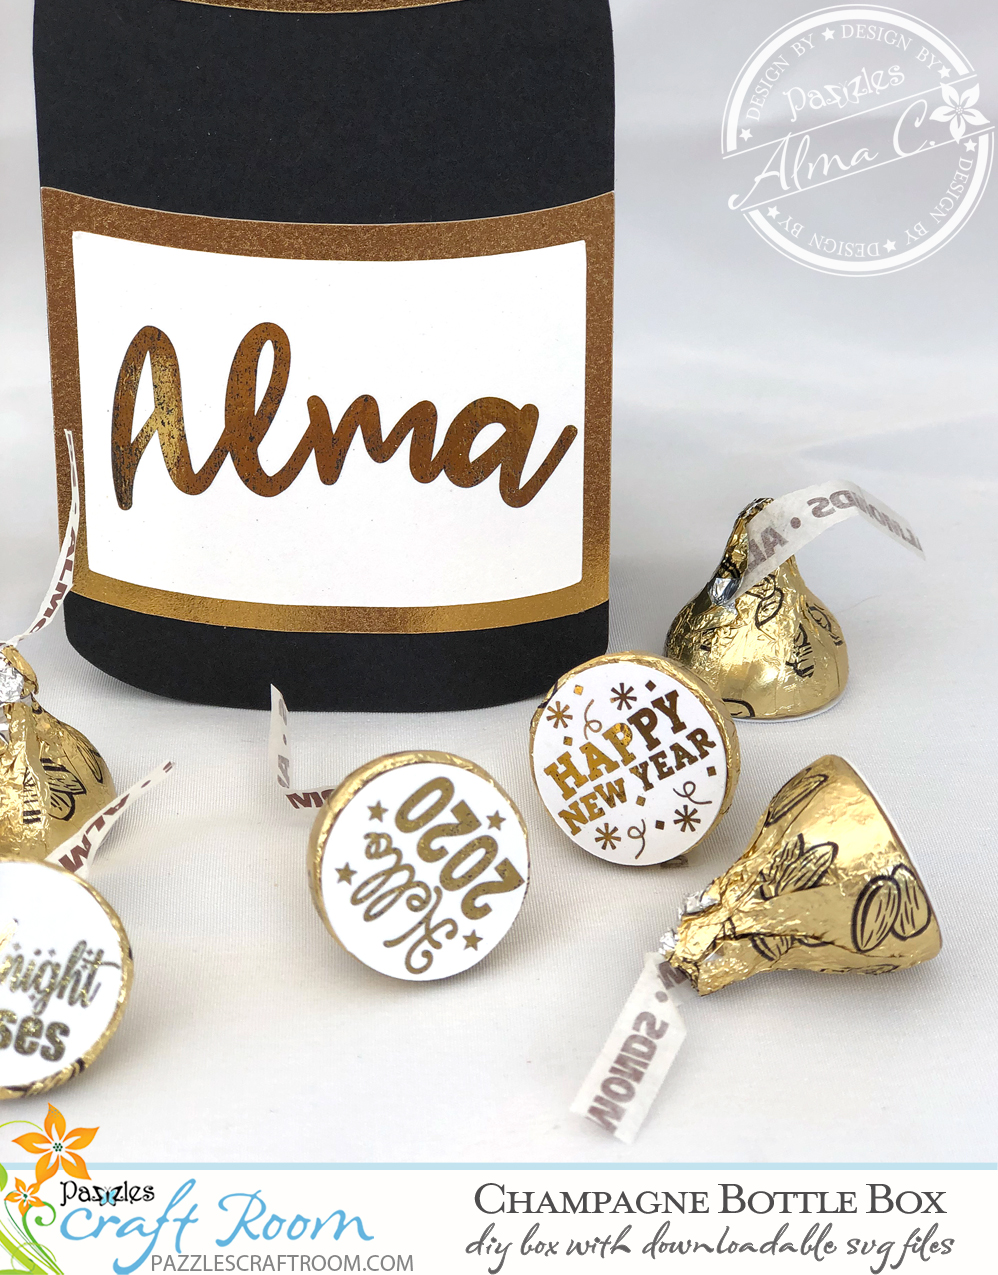 Pazzles DIY Champagne Bottle Box with instant SVG download. Compatible with all major electronic cutters including Pazzles Inspiration, Cricut, and Silhouette Cameo. Design by Alma Cervantes.